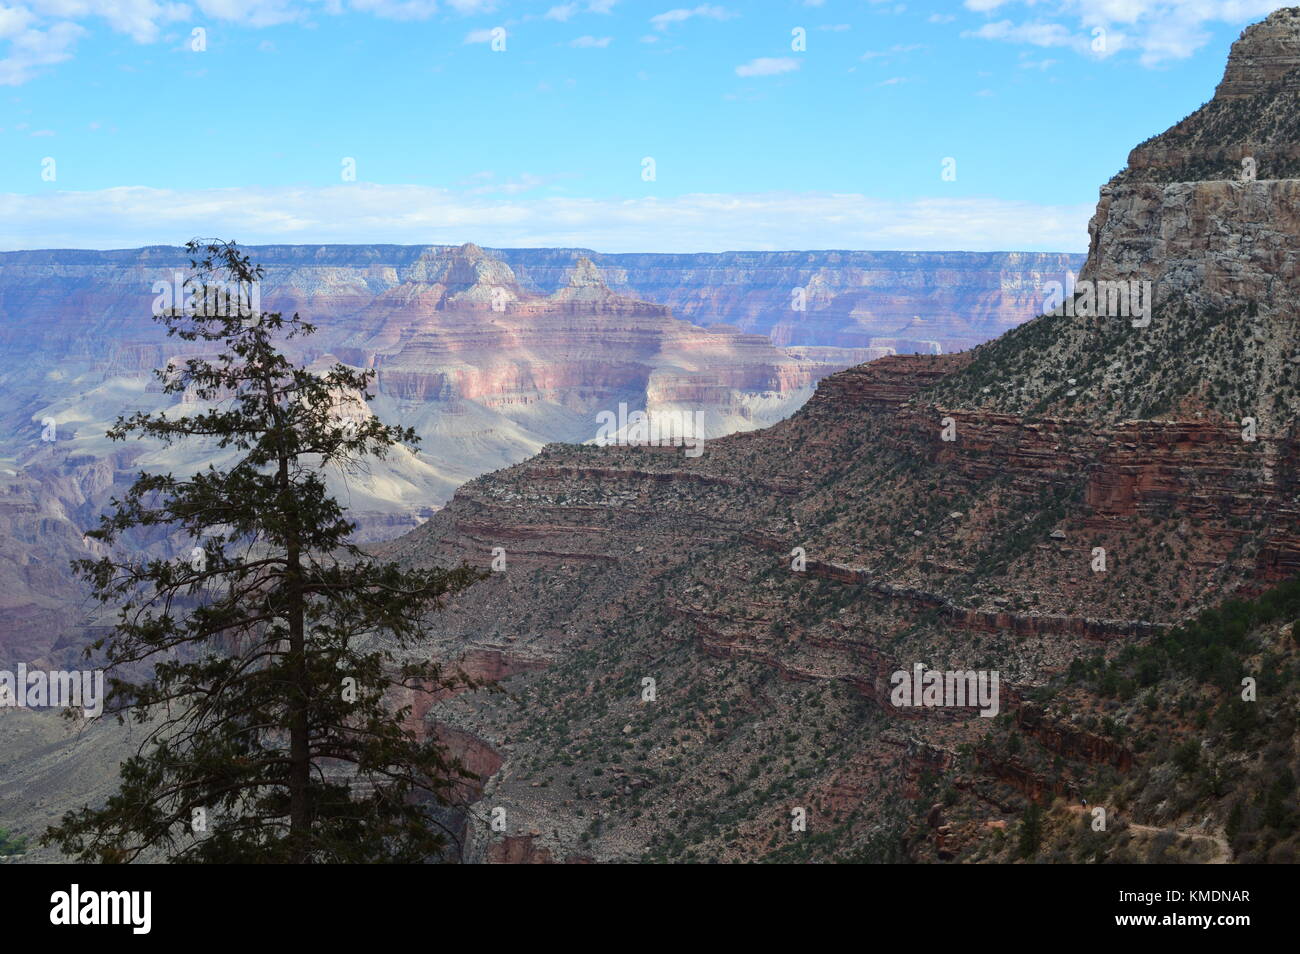 A view of the Grand canyon with tree in foreground, Arizona, USA. One of the world wonder. Stock Photo